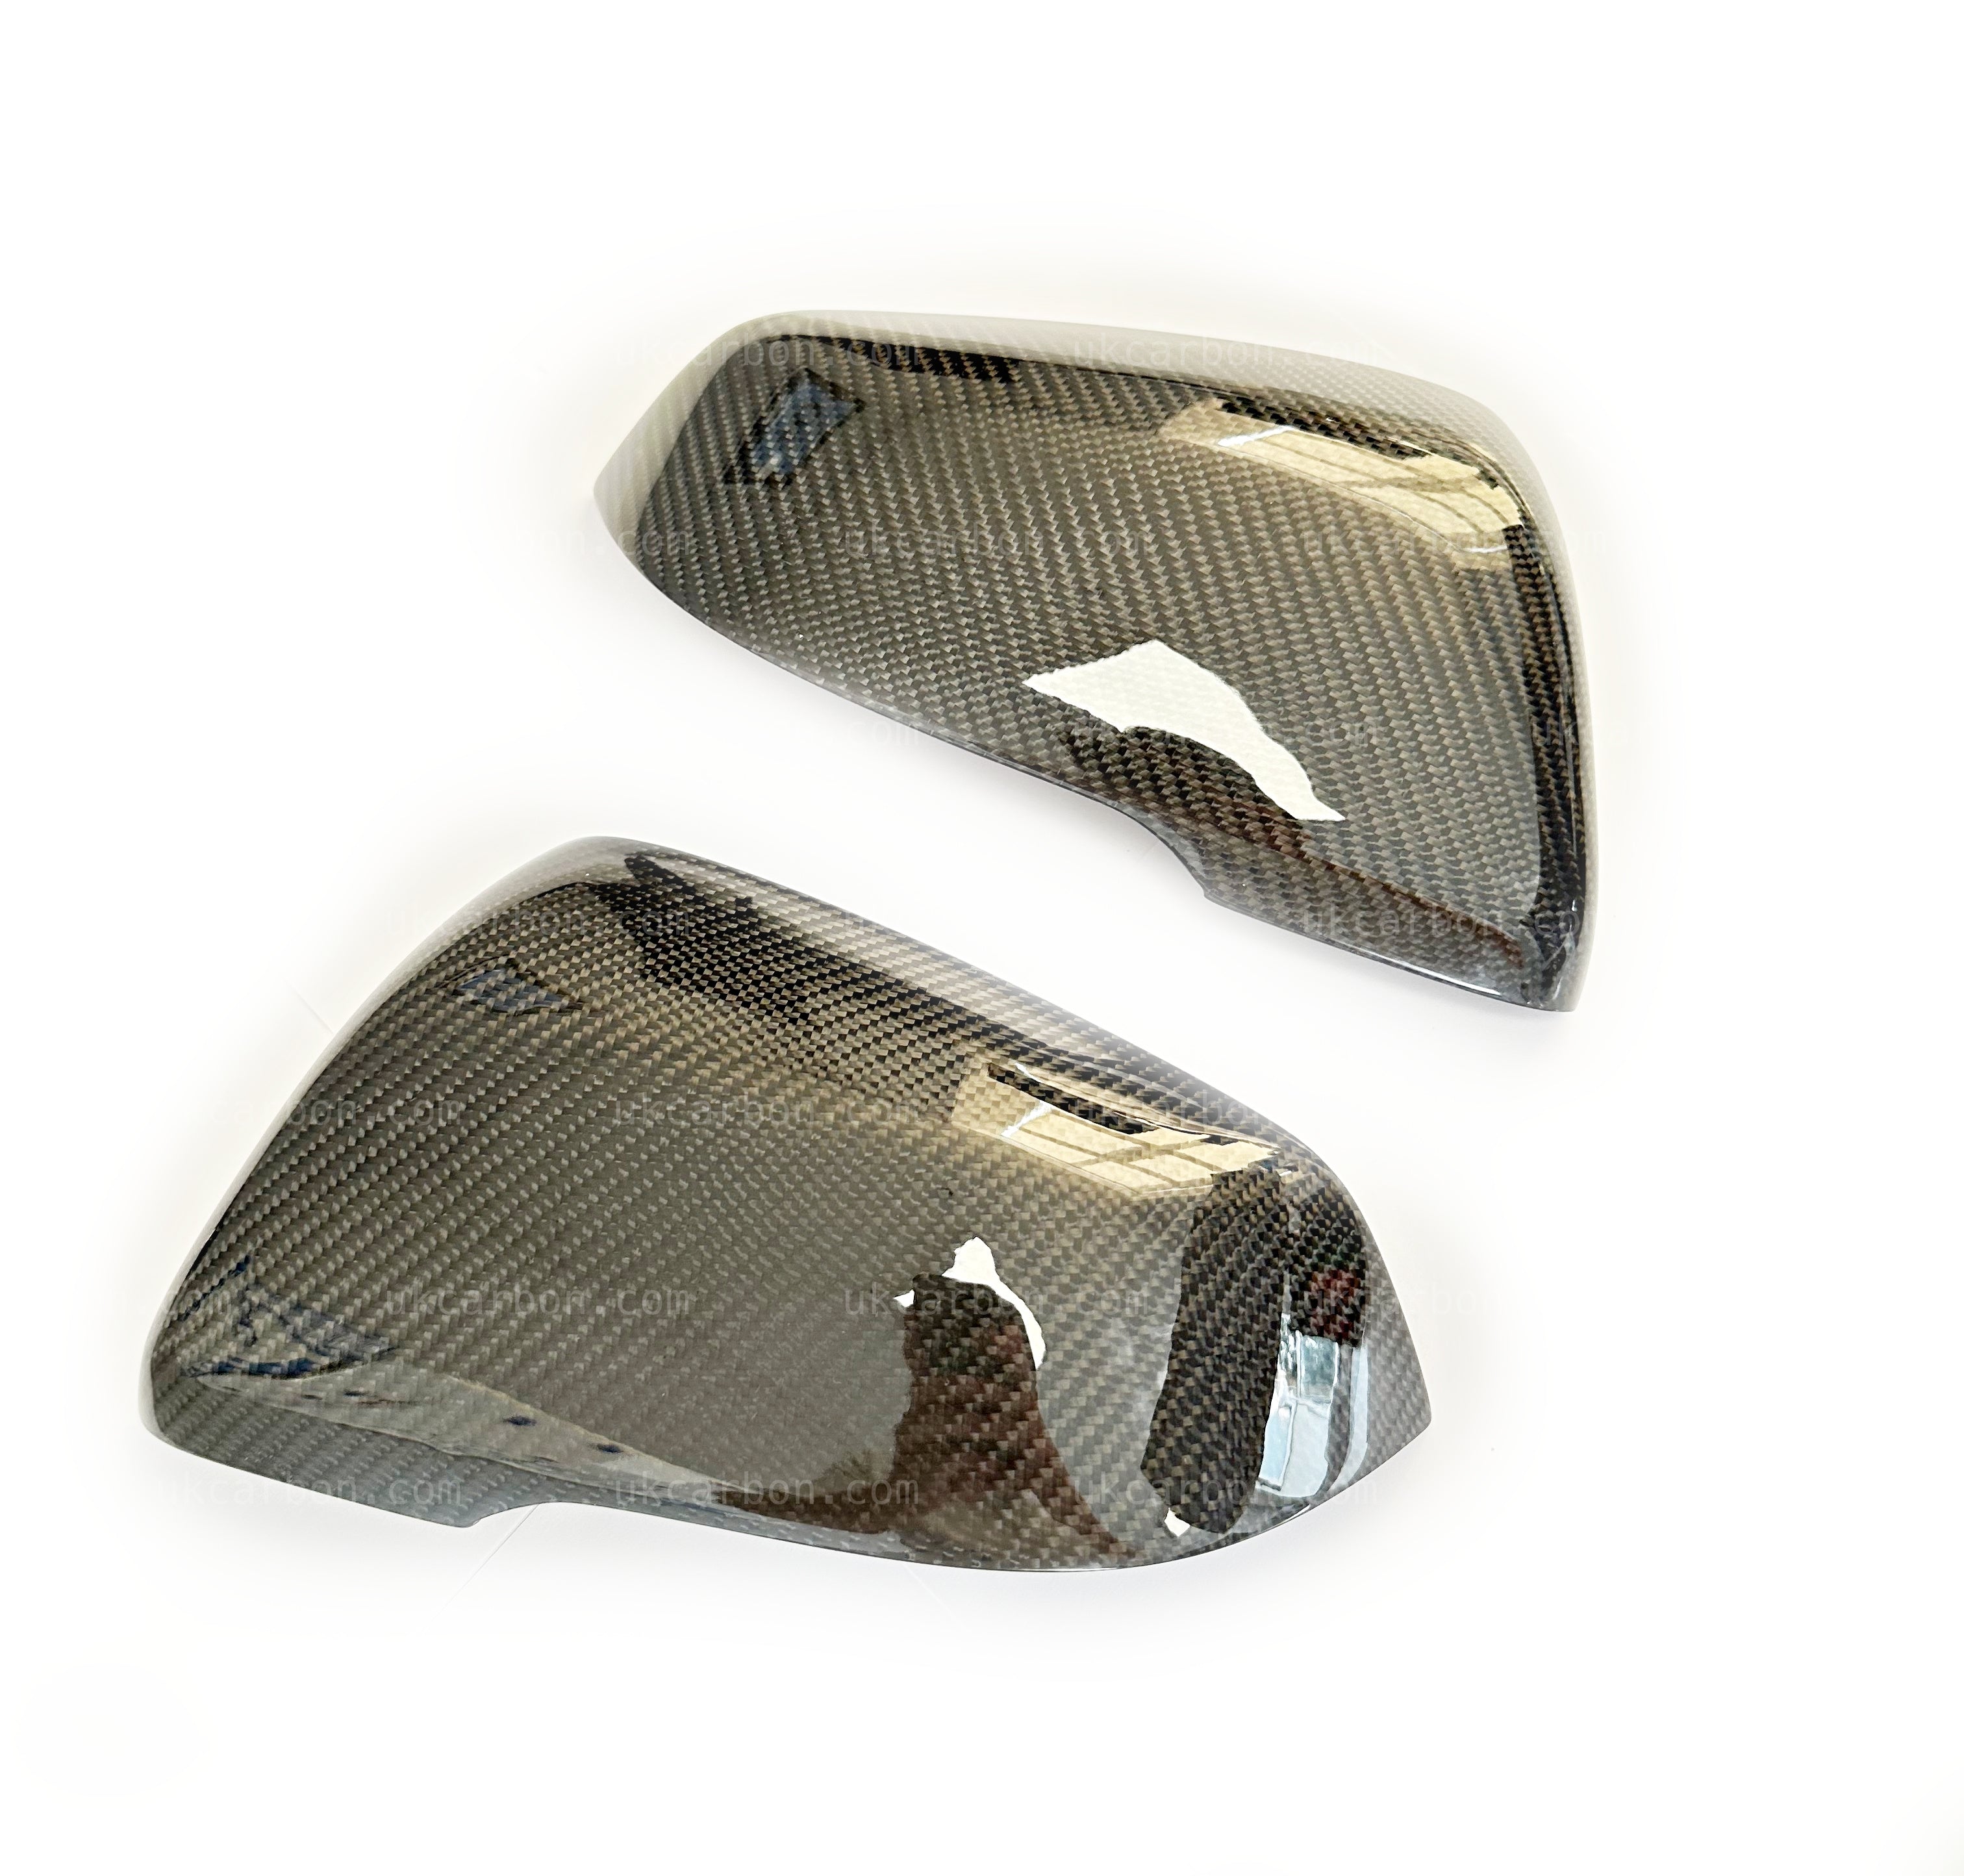 TOYOTA SUPRA Carbon Mirror Fibre Wing Cover Replacements Covers A90 by UKCarbon